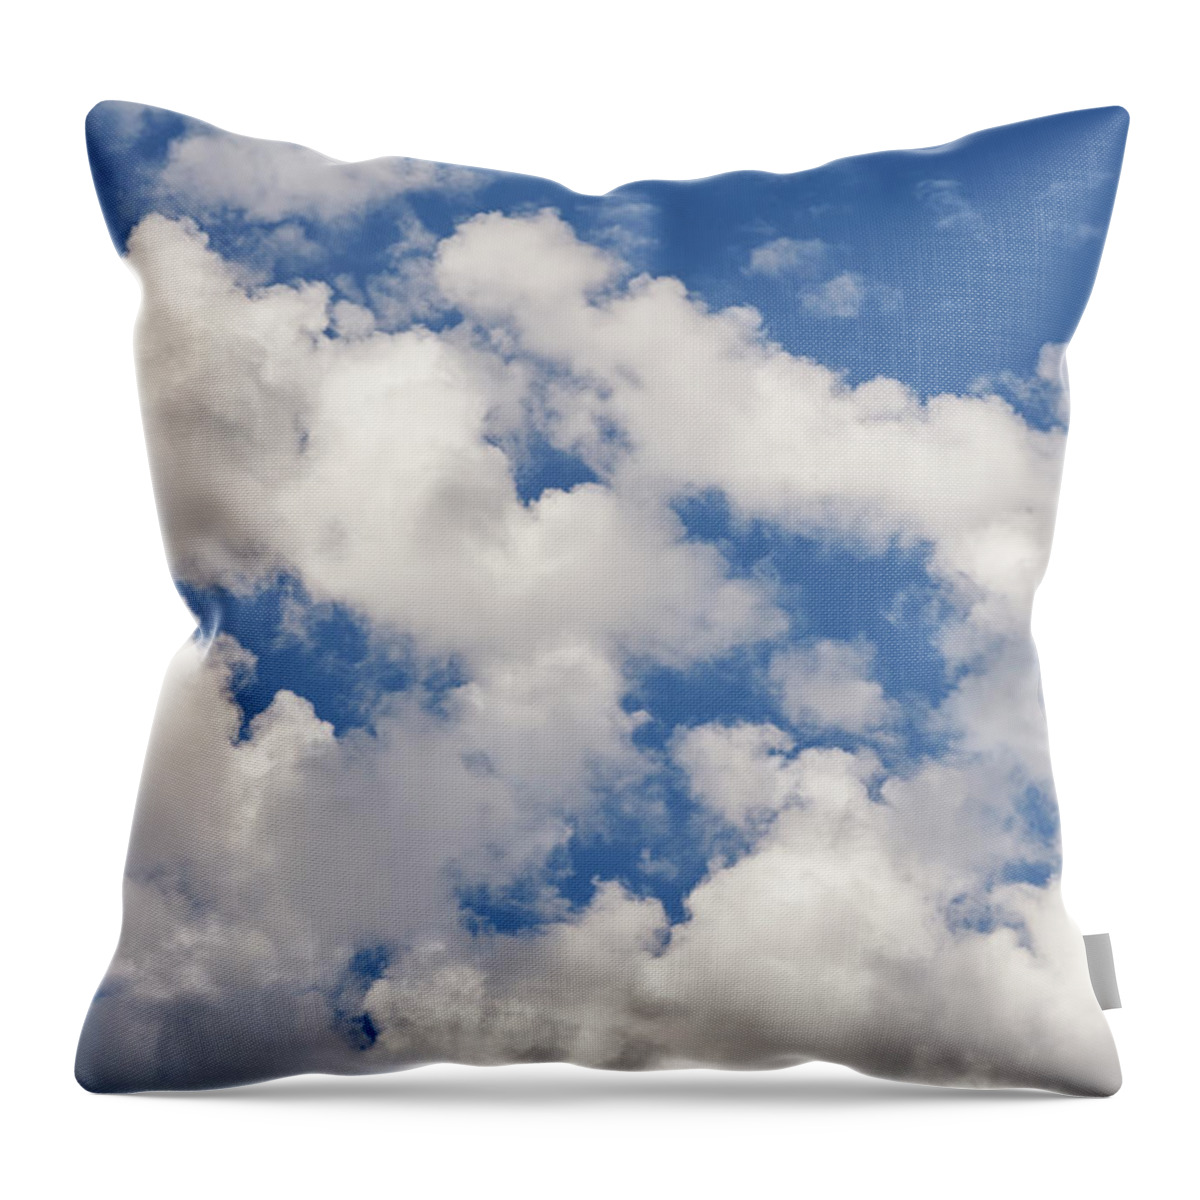 Fluffy Clouds Blue Sky Background Throw Pillow by Akurtz 